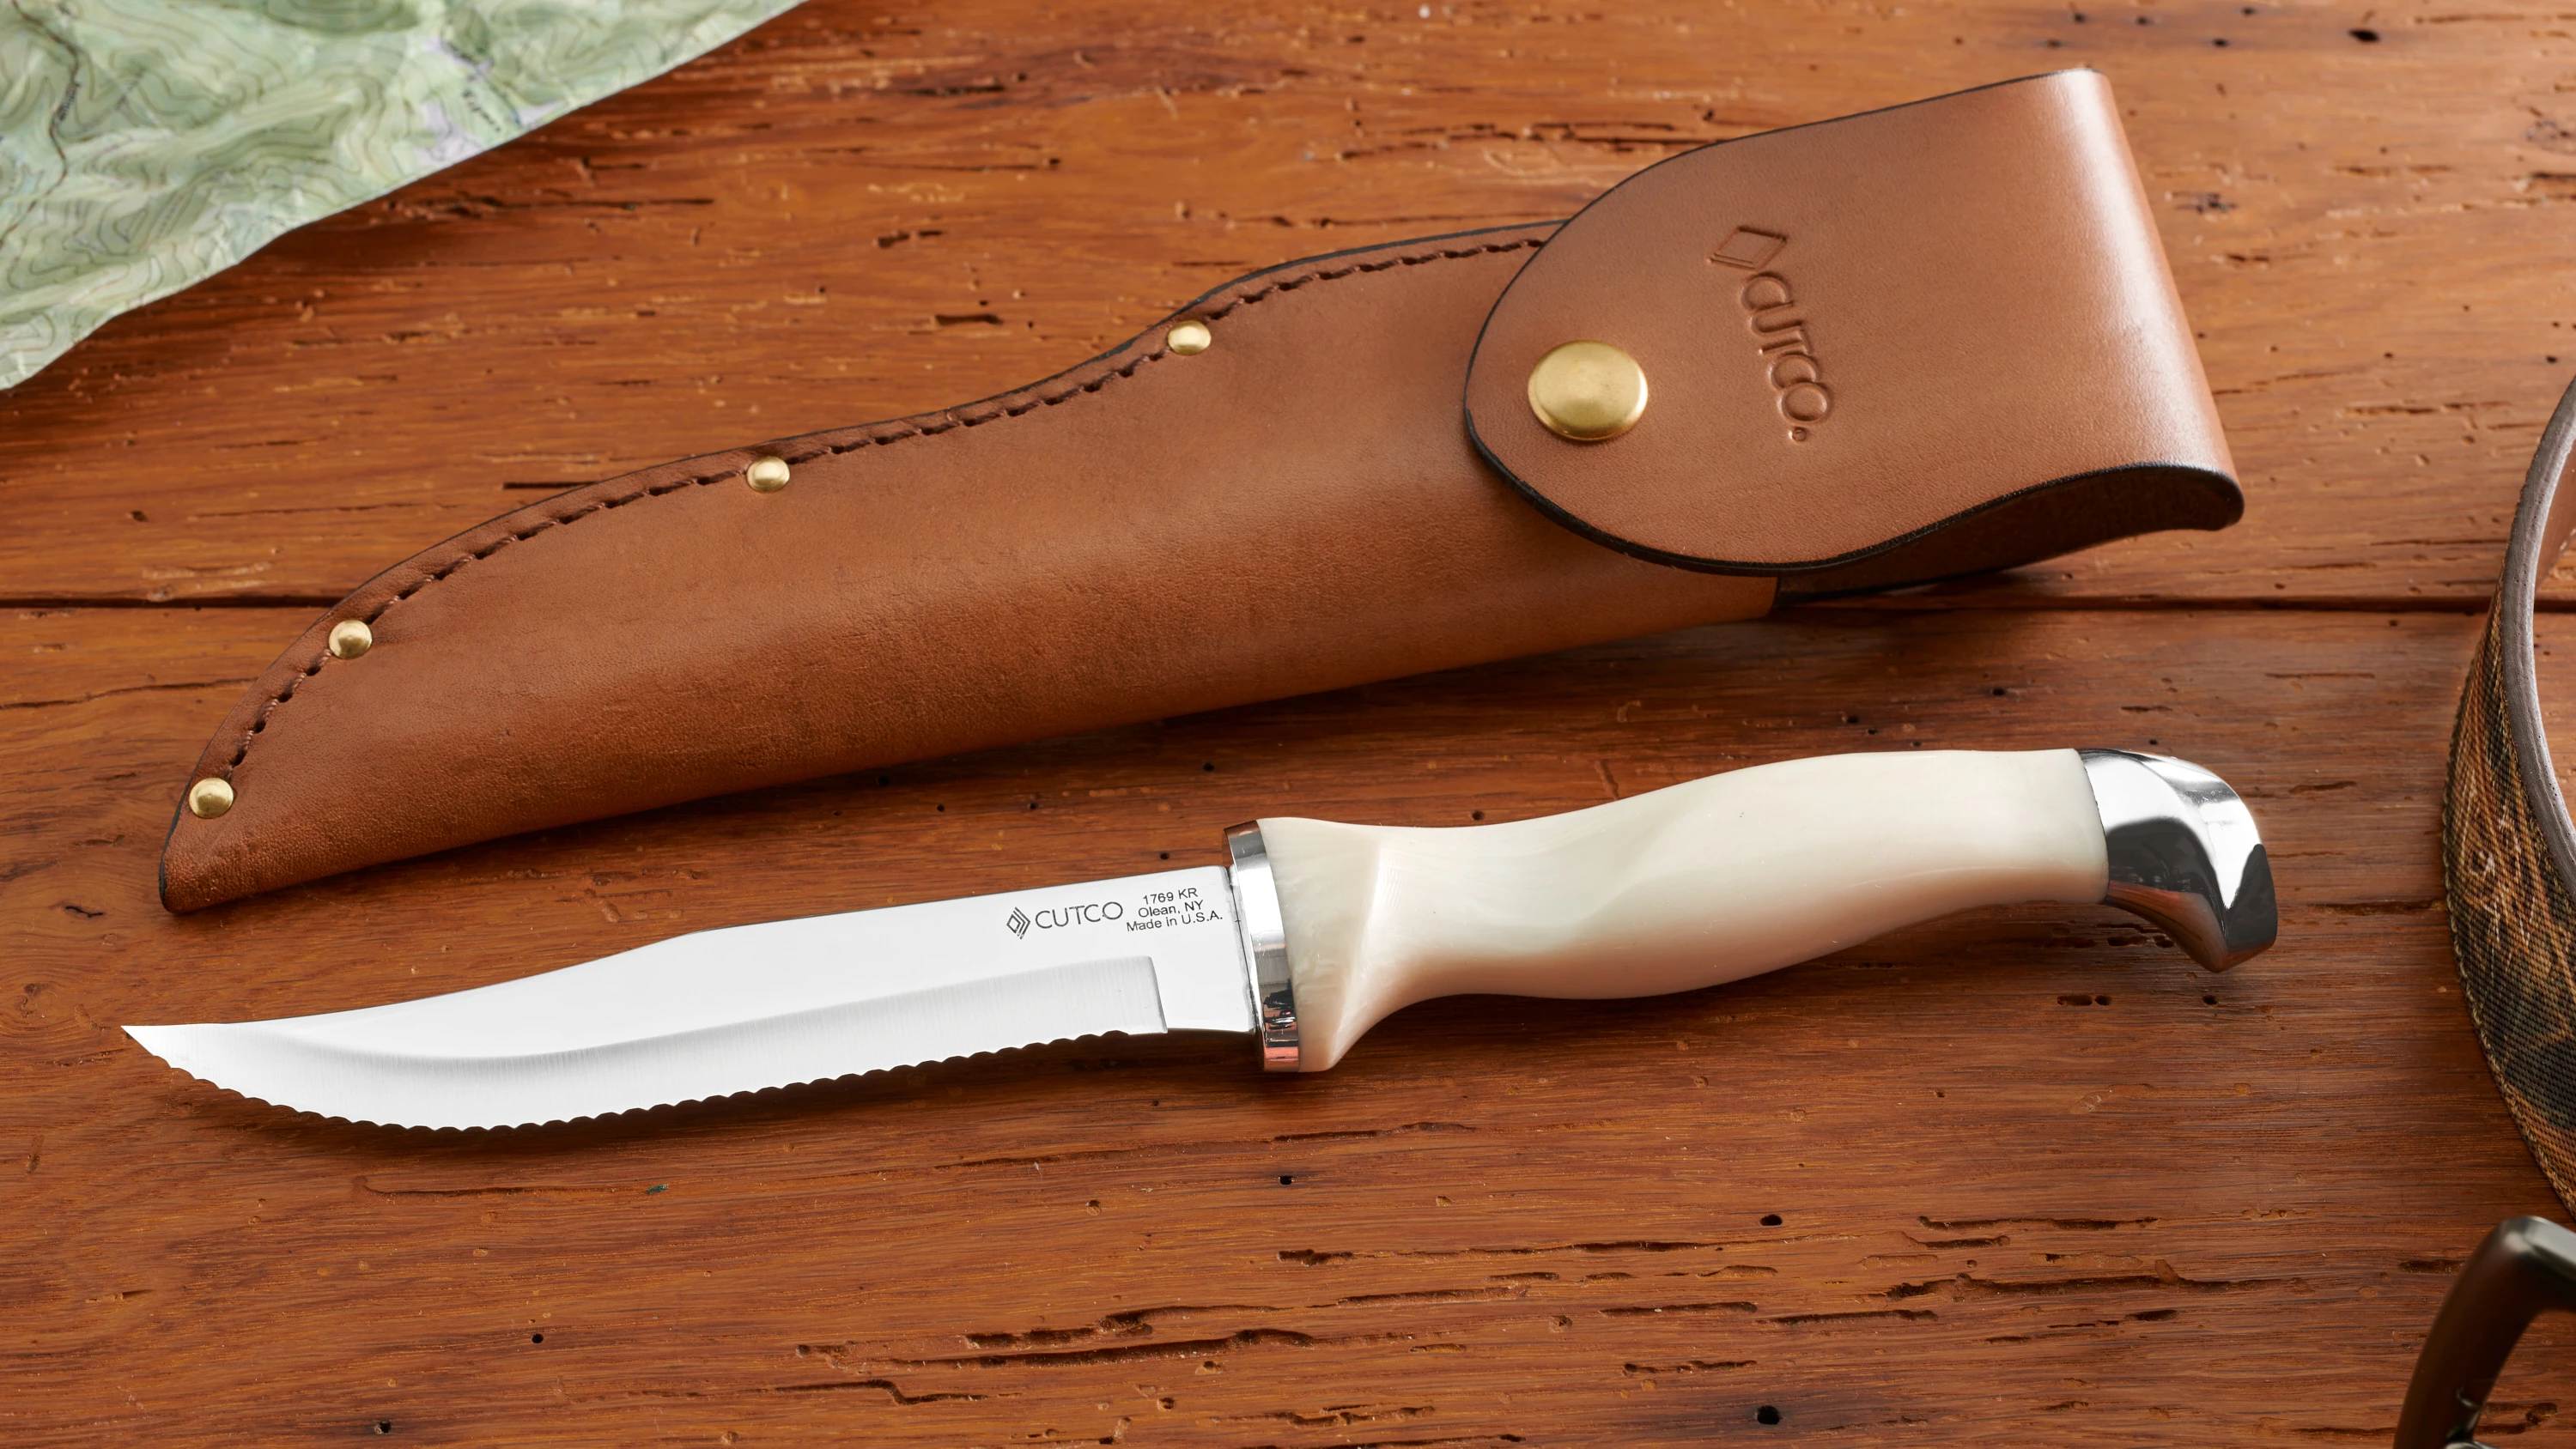  Cutco Model 1769 White (Pearl) Hunting Knife with Straight  Edge Blade and Leather Sheath in White Gift Box : Hunting Fixed Blade Knives  : Sports & Outdoors